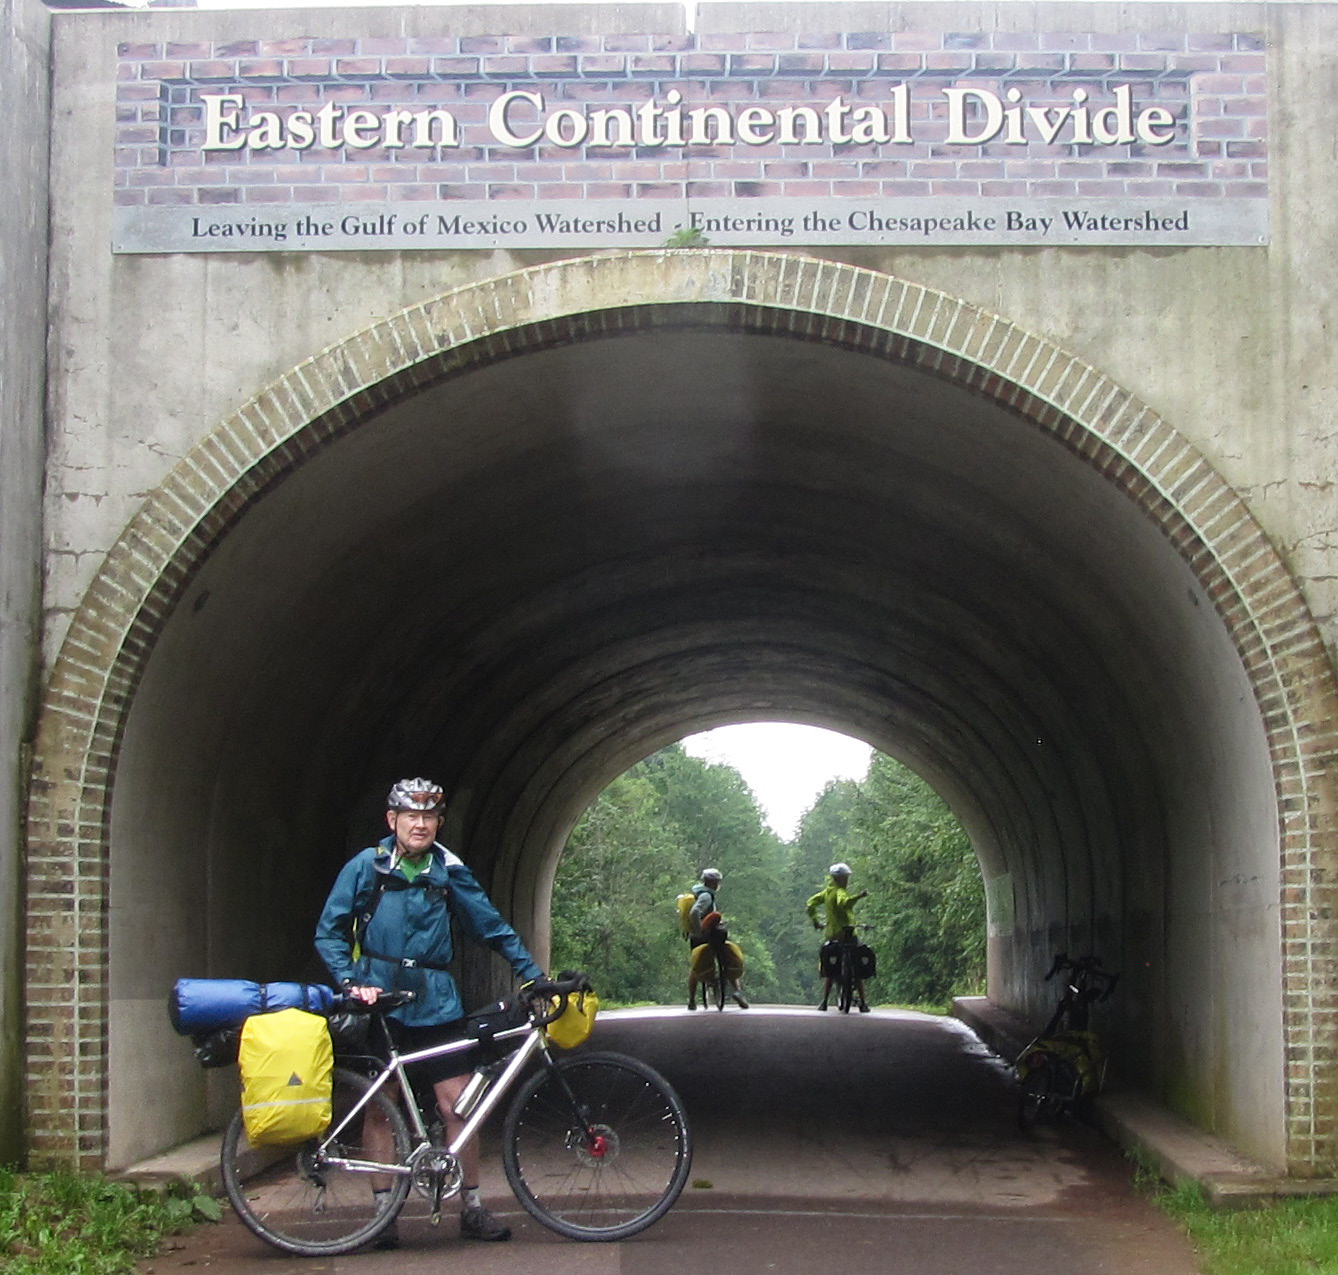 Bill Clement with his bike in front of the Eastern Continental Divide